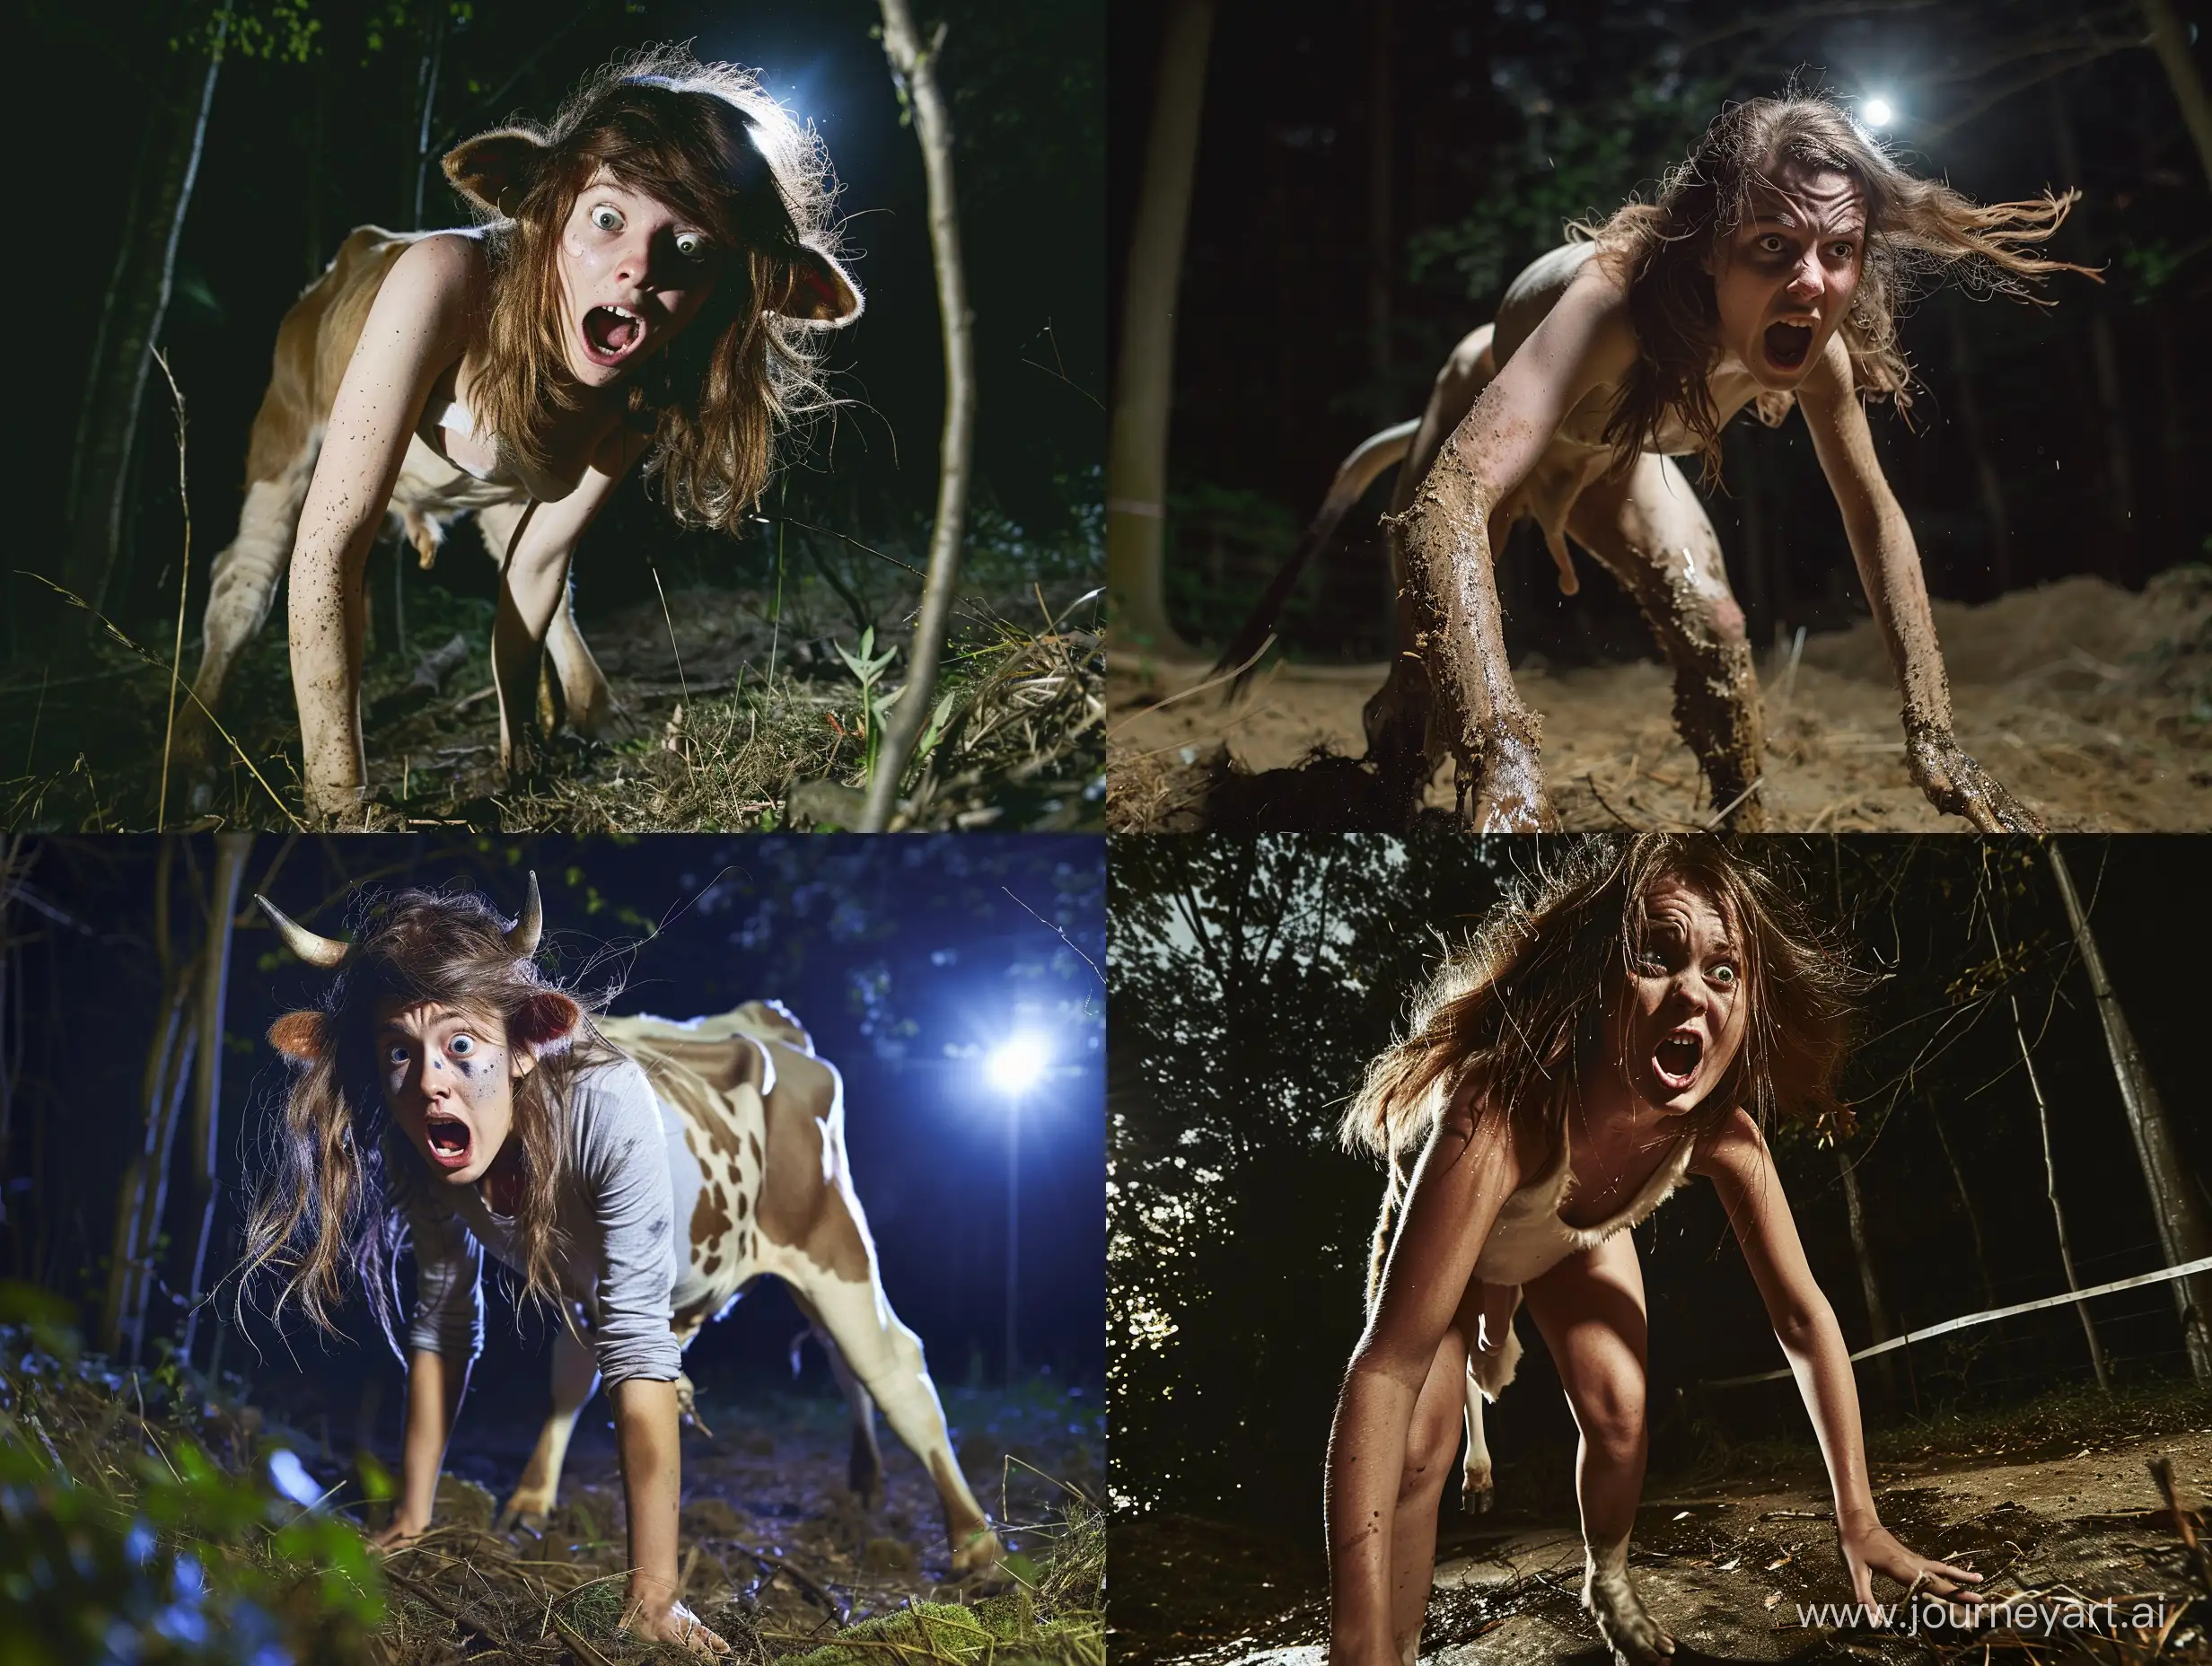 A young woman with loose brown hair, who has been transformed into a cow. The photo is taken while the transformation is almost completed. She is standing on all fours in a forest at night, shouting for help. She has a desperate expression. Realistic photograph, full body picture